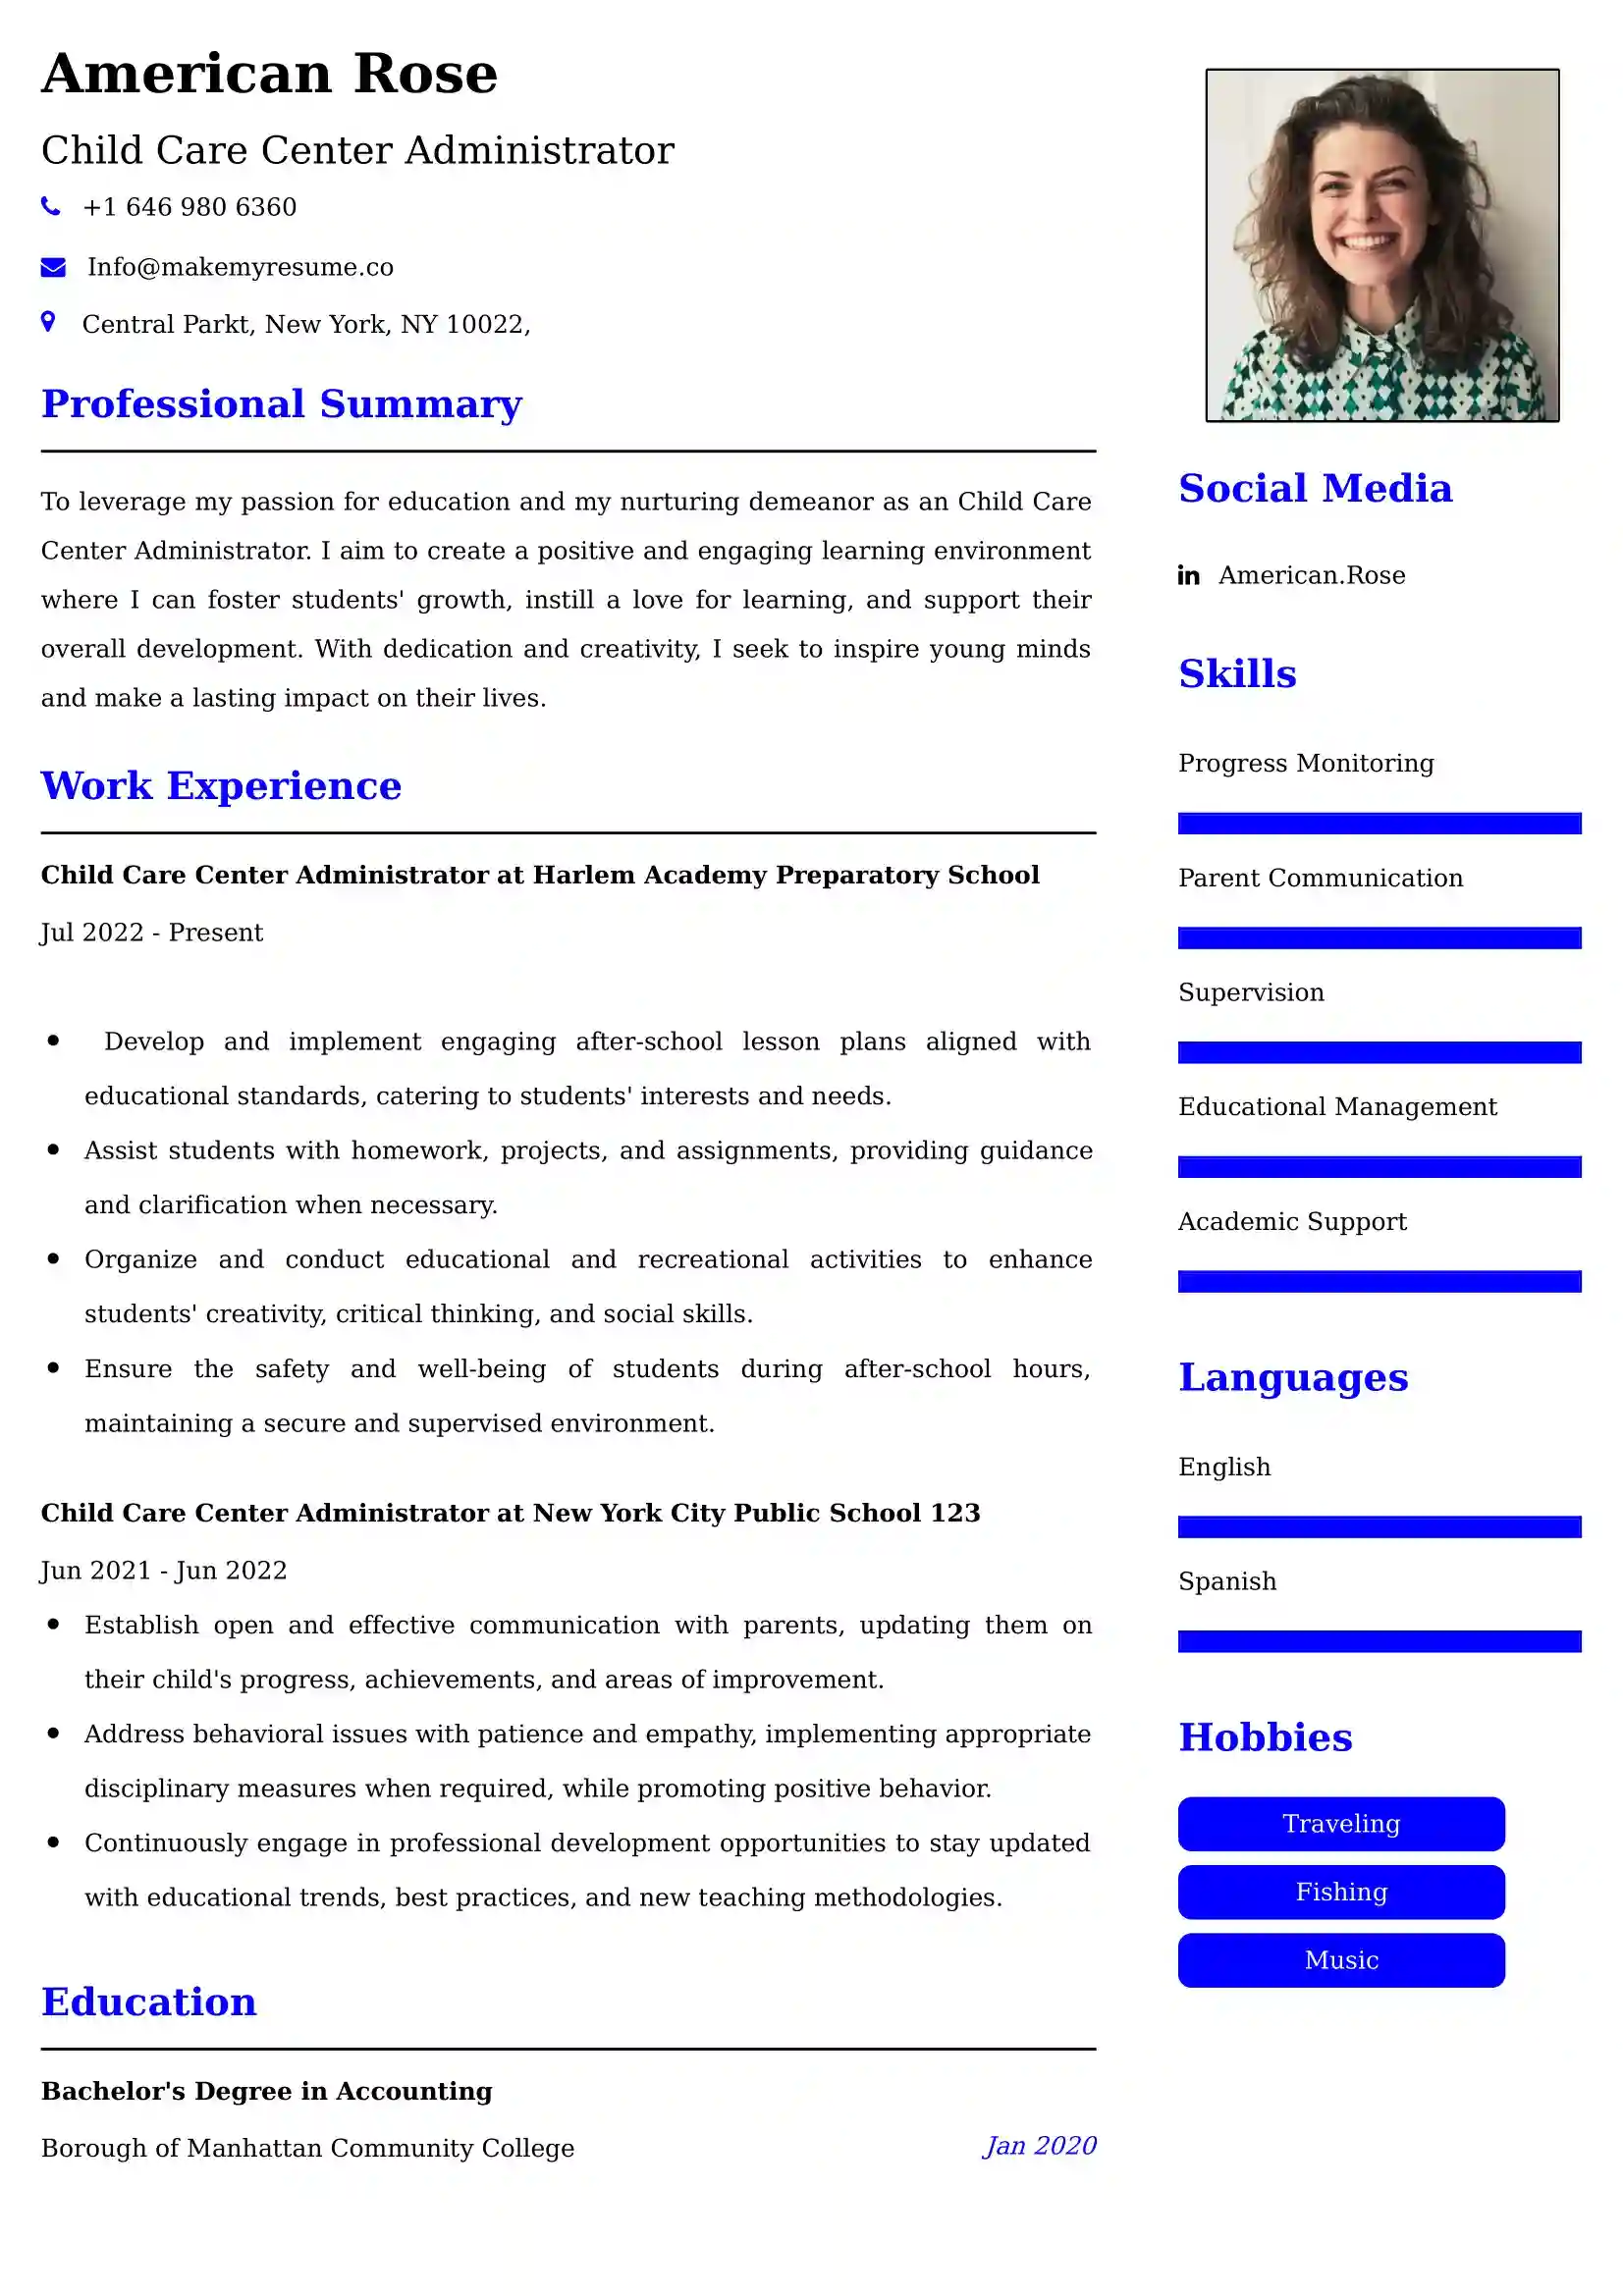 Child Care Center Administrator Resume Examples - Brazilian Format, Latest Template